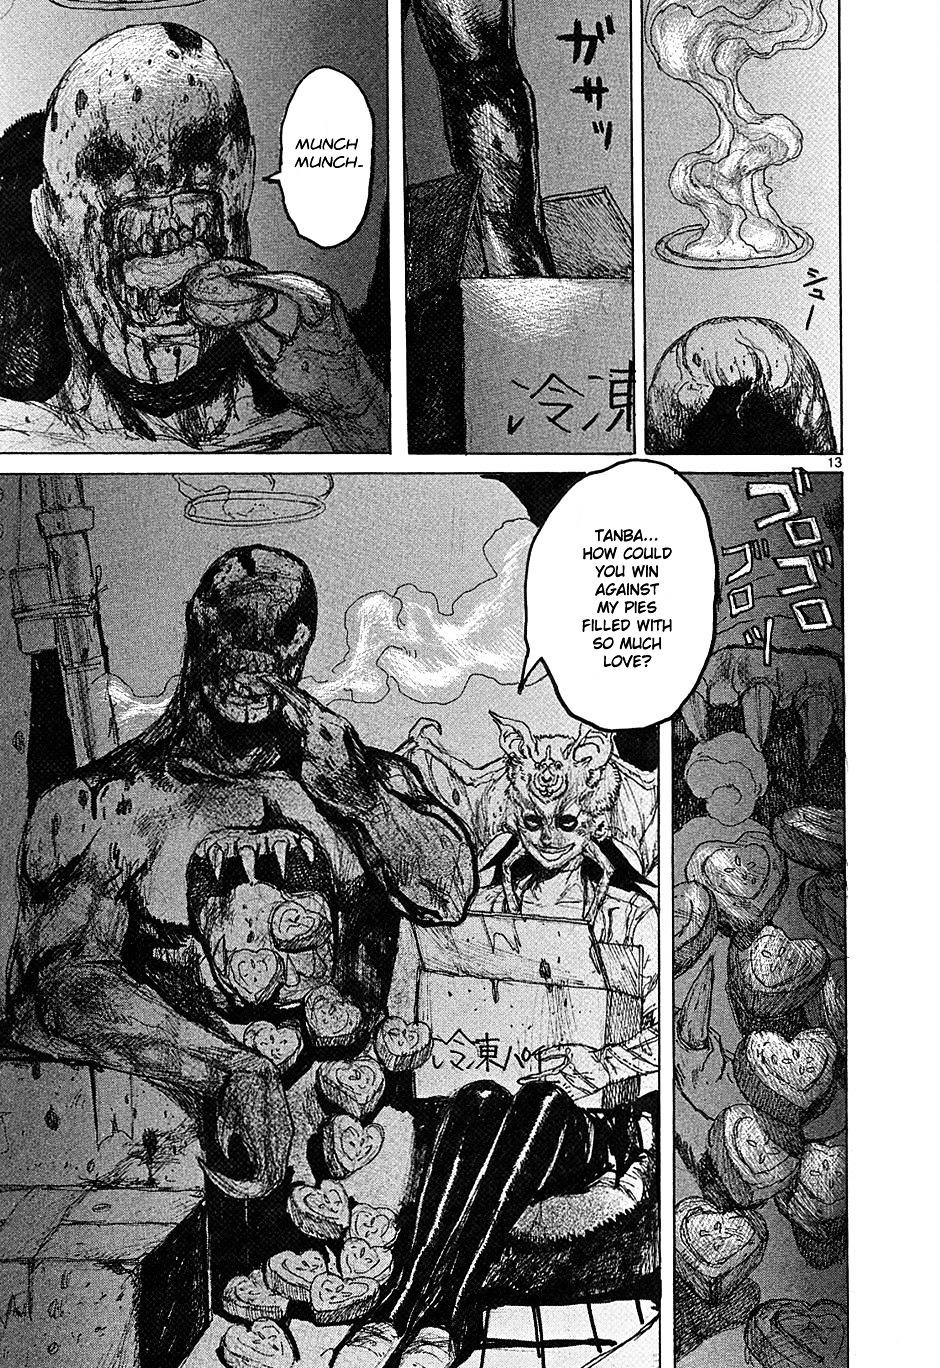 Dorohedoro Chapter 38 : Meatbags Free For All page 13 - Mangakakalot